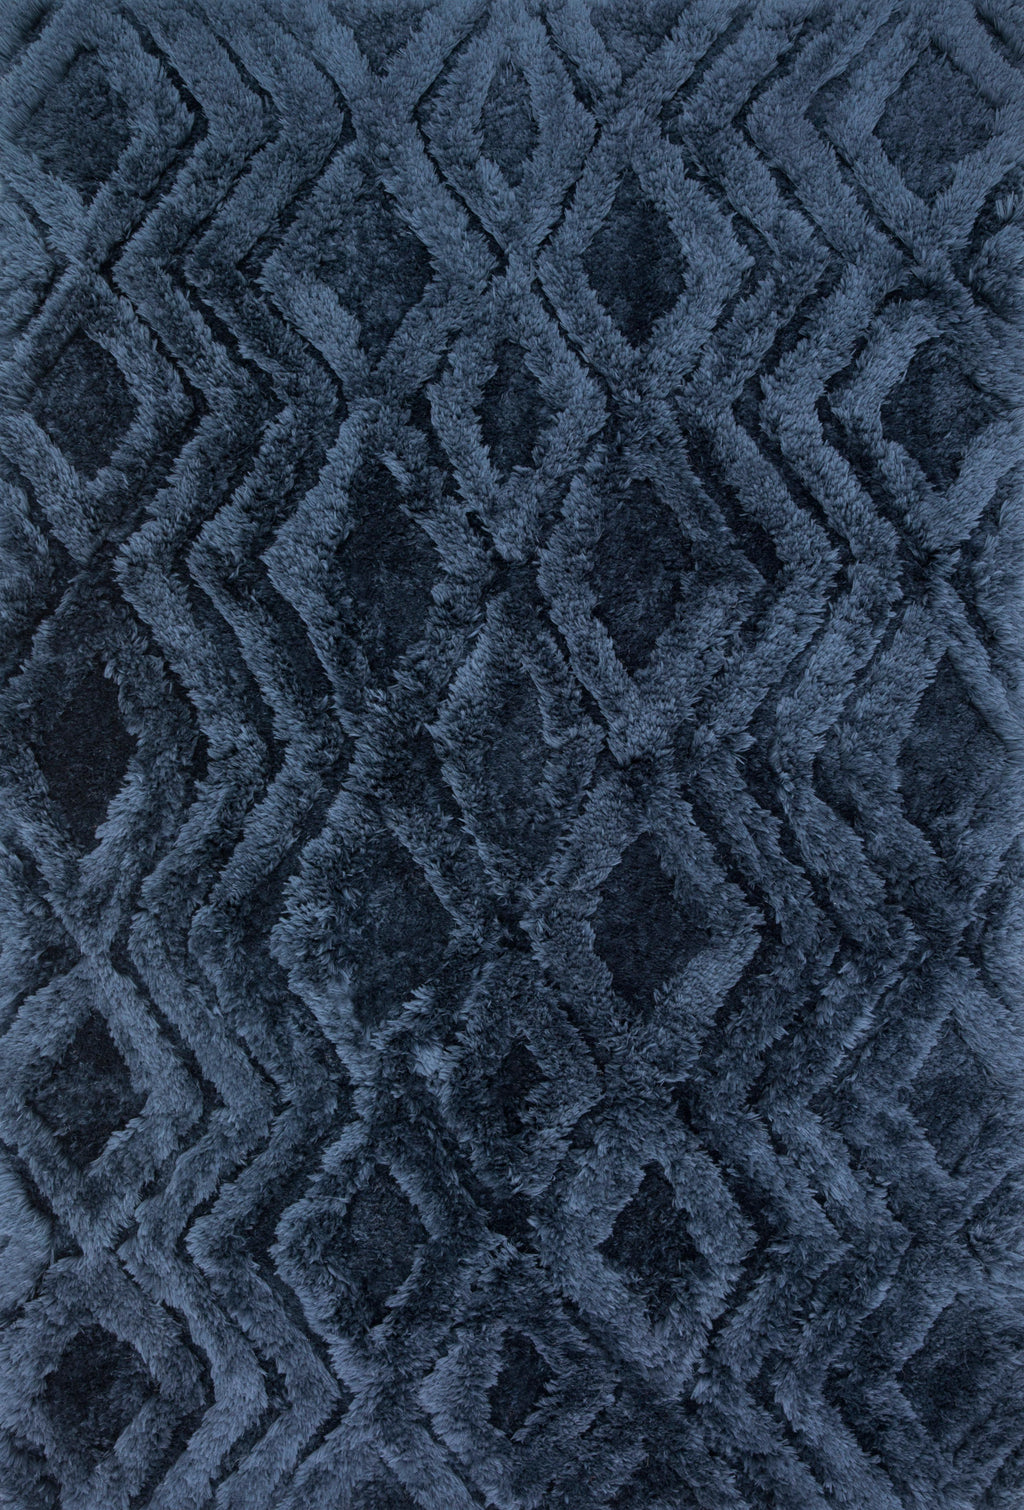 CASPIA Collection Rug  in  INDIGO Blue Small Hand-Tufted Polyester